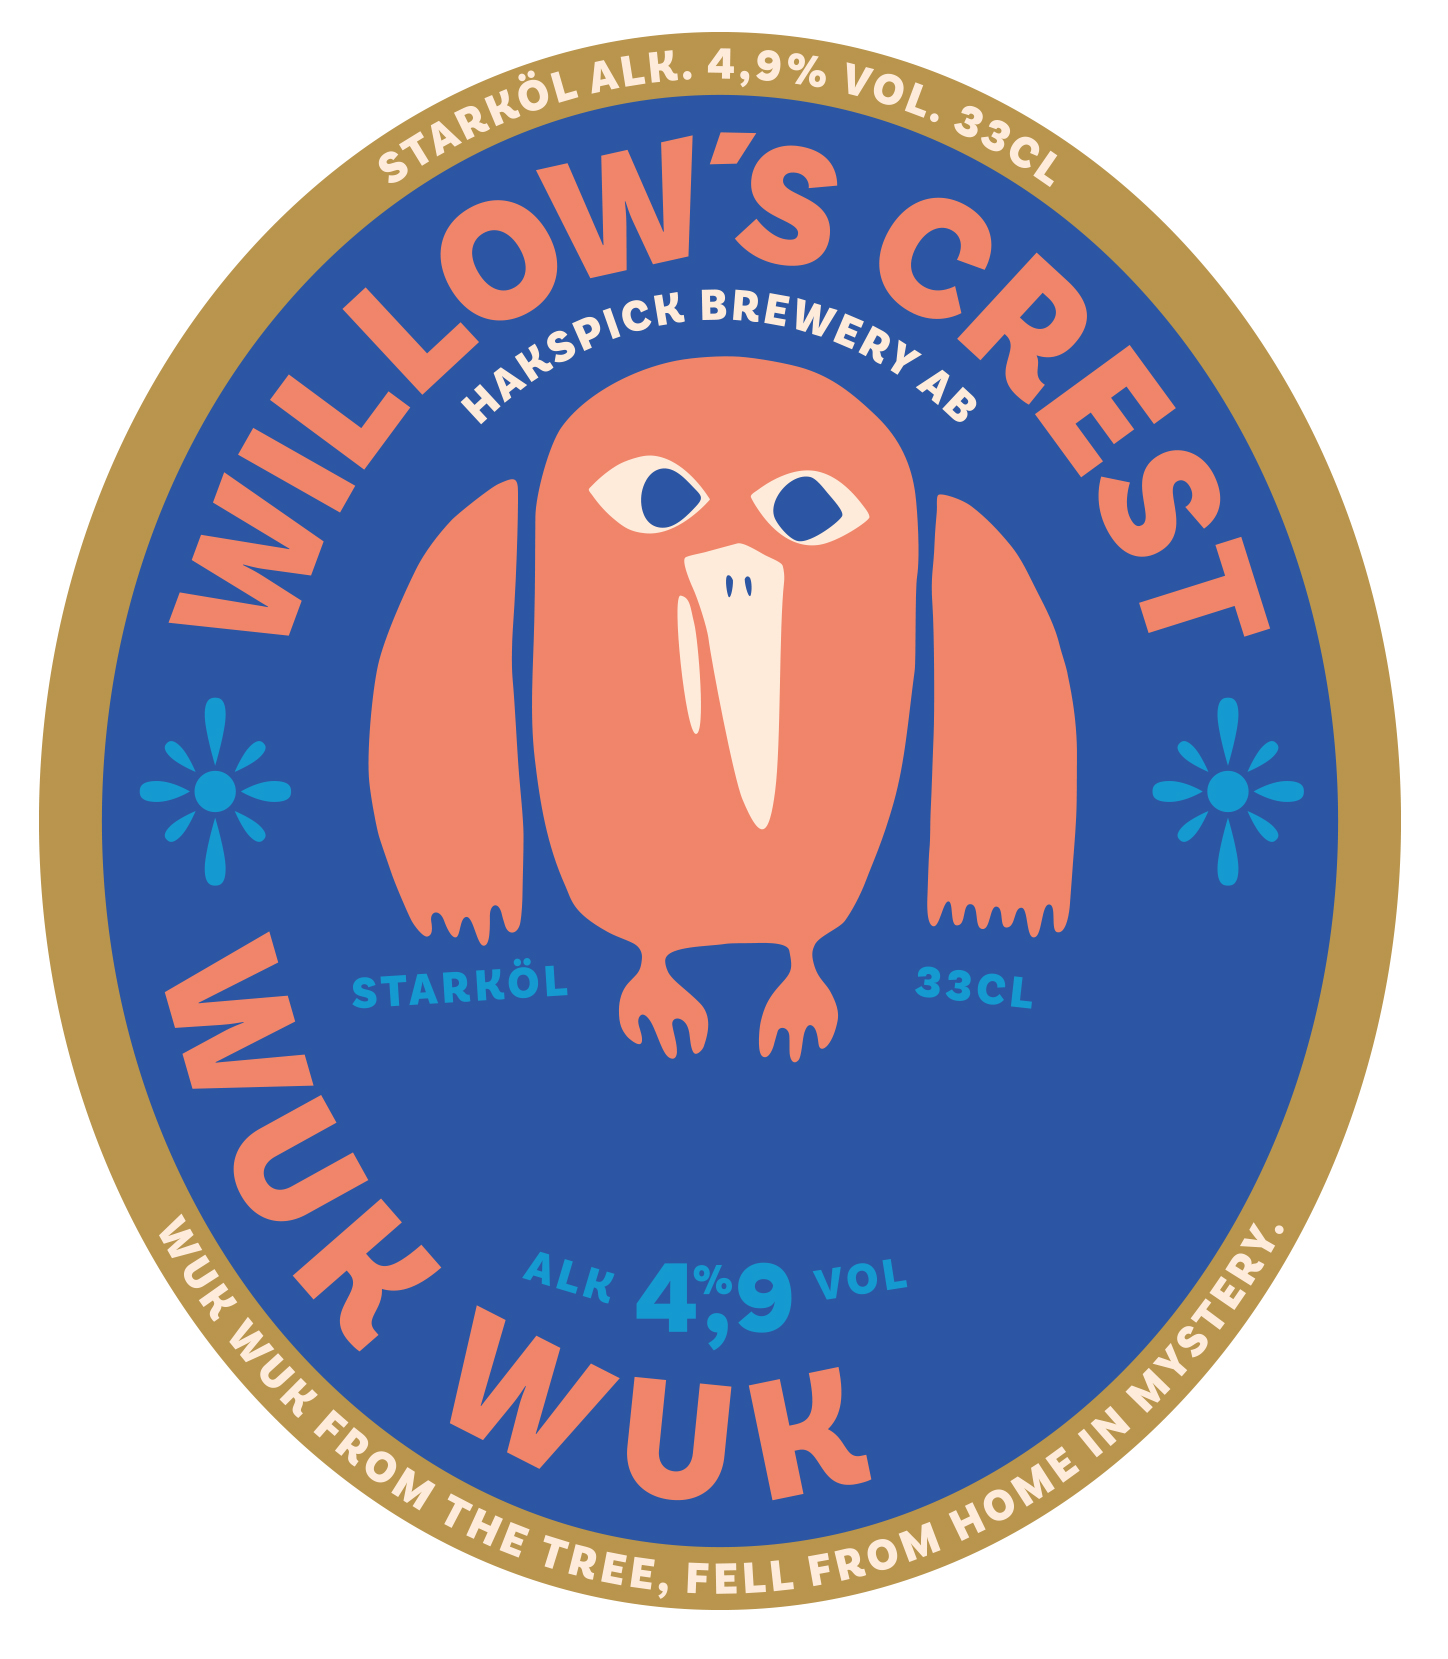 WILLOW'S CREST WUK WUK HAKSPICK BREWERY AB STARKÖL 33CL ALK. 4,9% VOL STARKÖL ALK. 4,9 % VOL. 33CL WUK WUK FROM THE TREE, FELL FROM HOME IN MYSTERY..